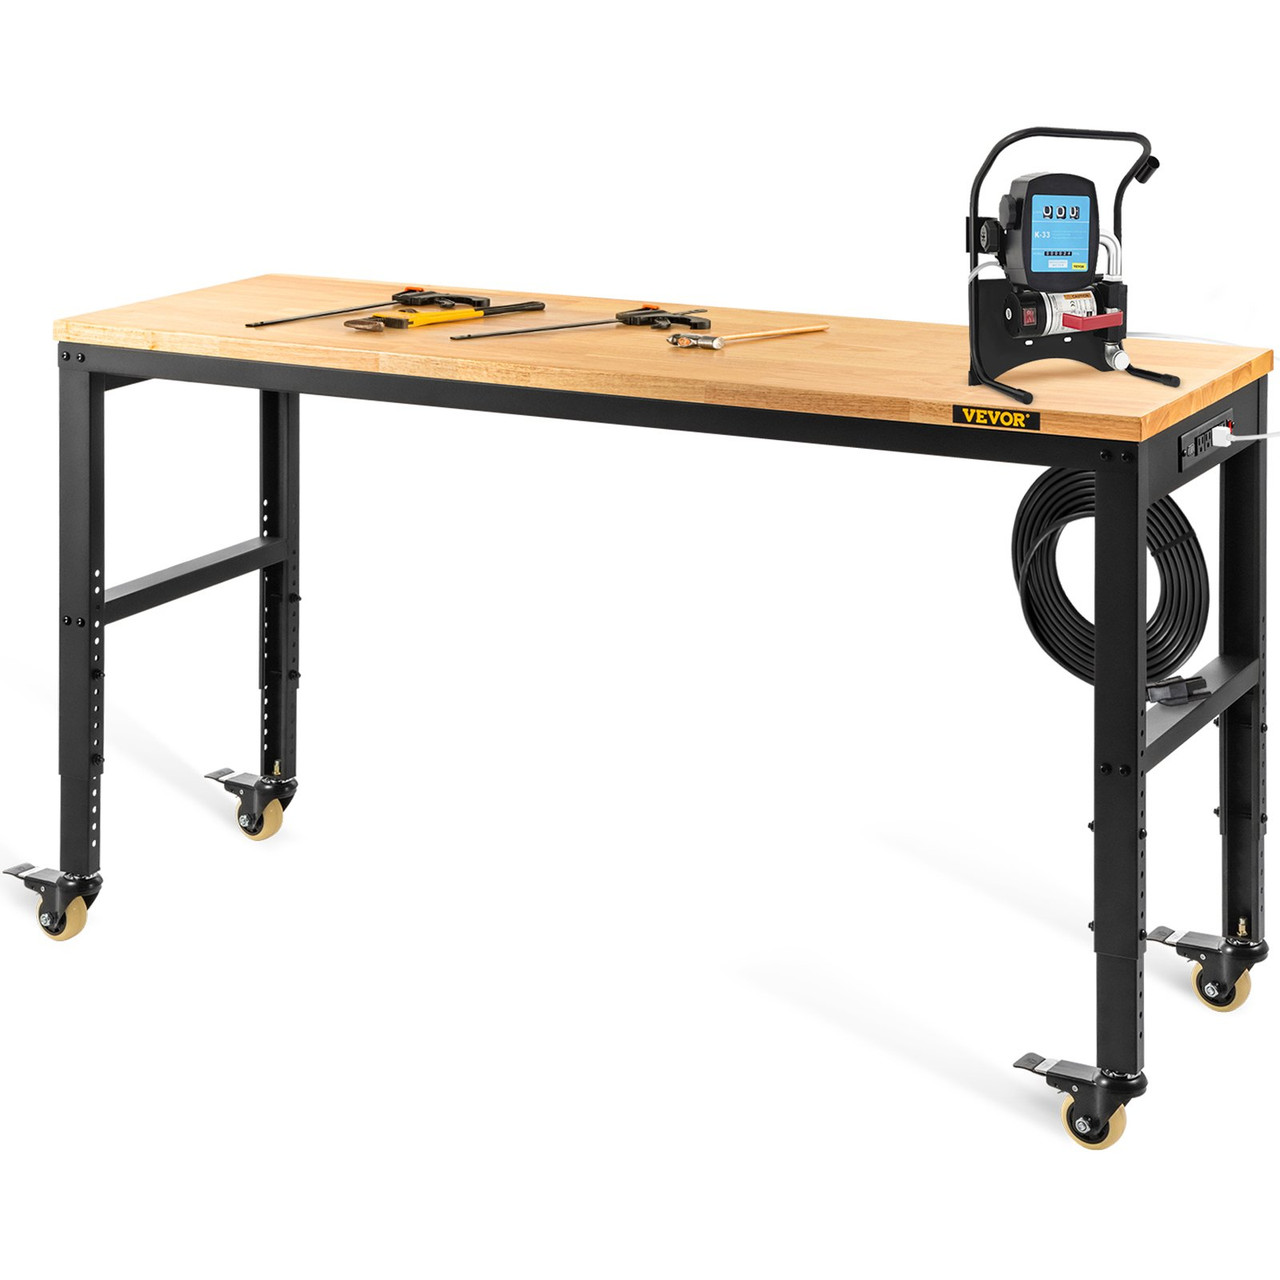 Adjustable Height Workbench 48"L x 20"W Work Bench w/ Power Outlet Casters